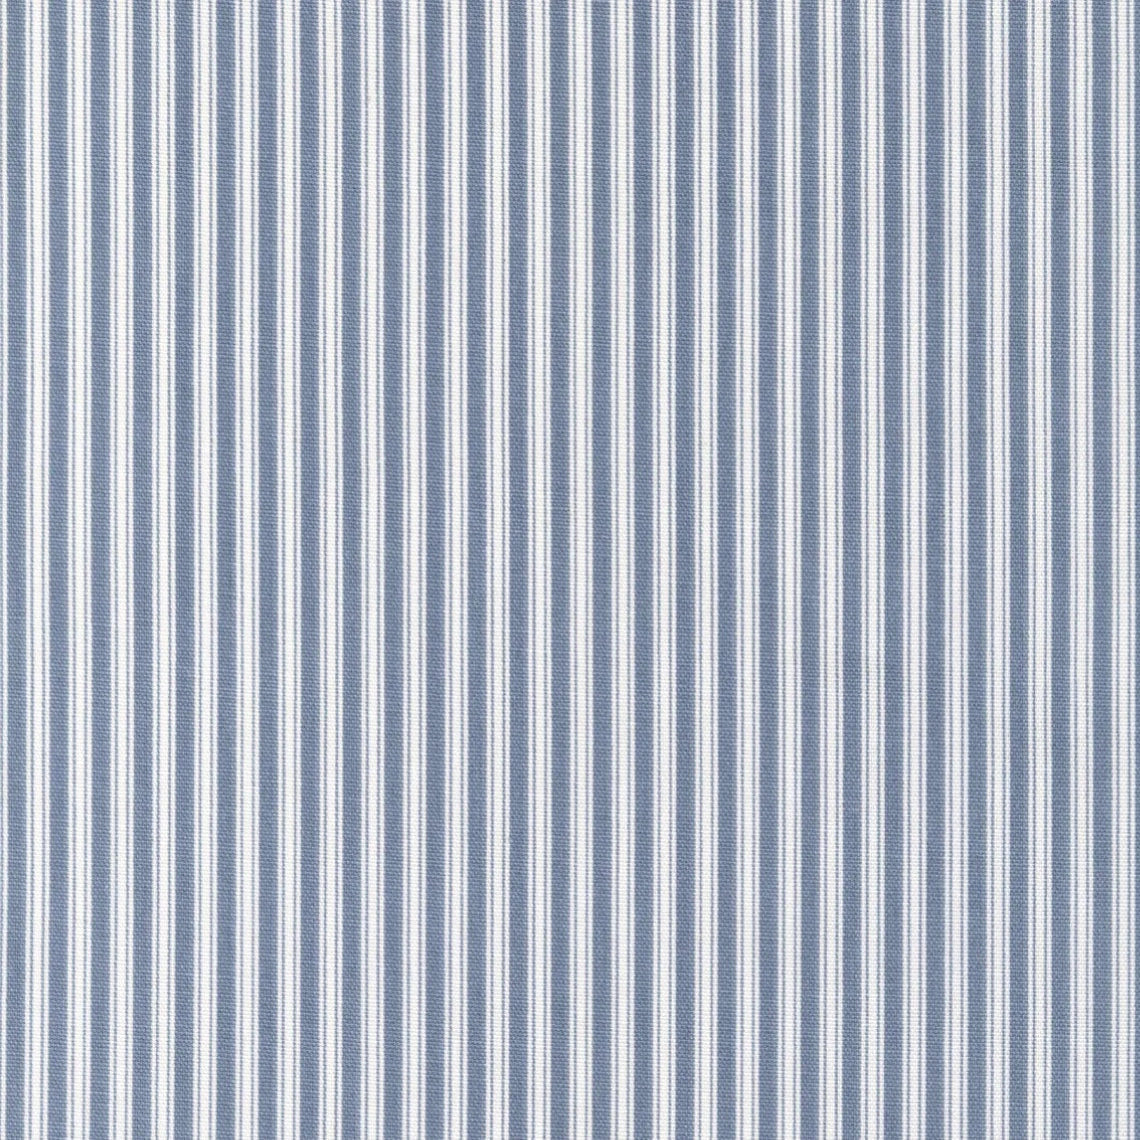 tailored tier curtains in polo sail blue stripe on white